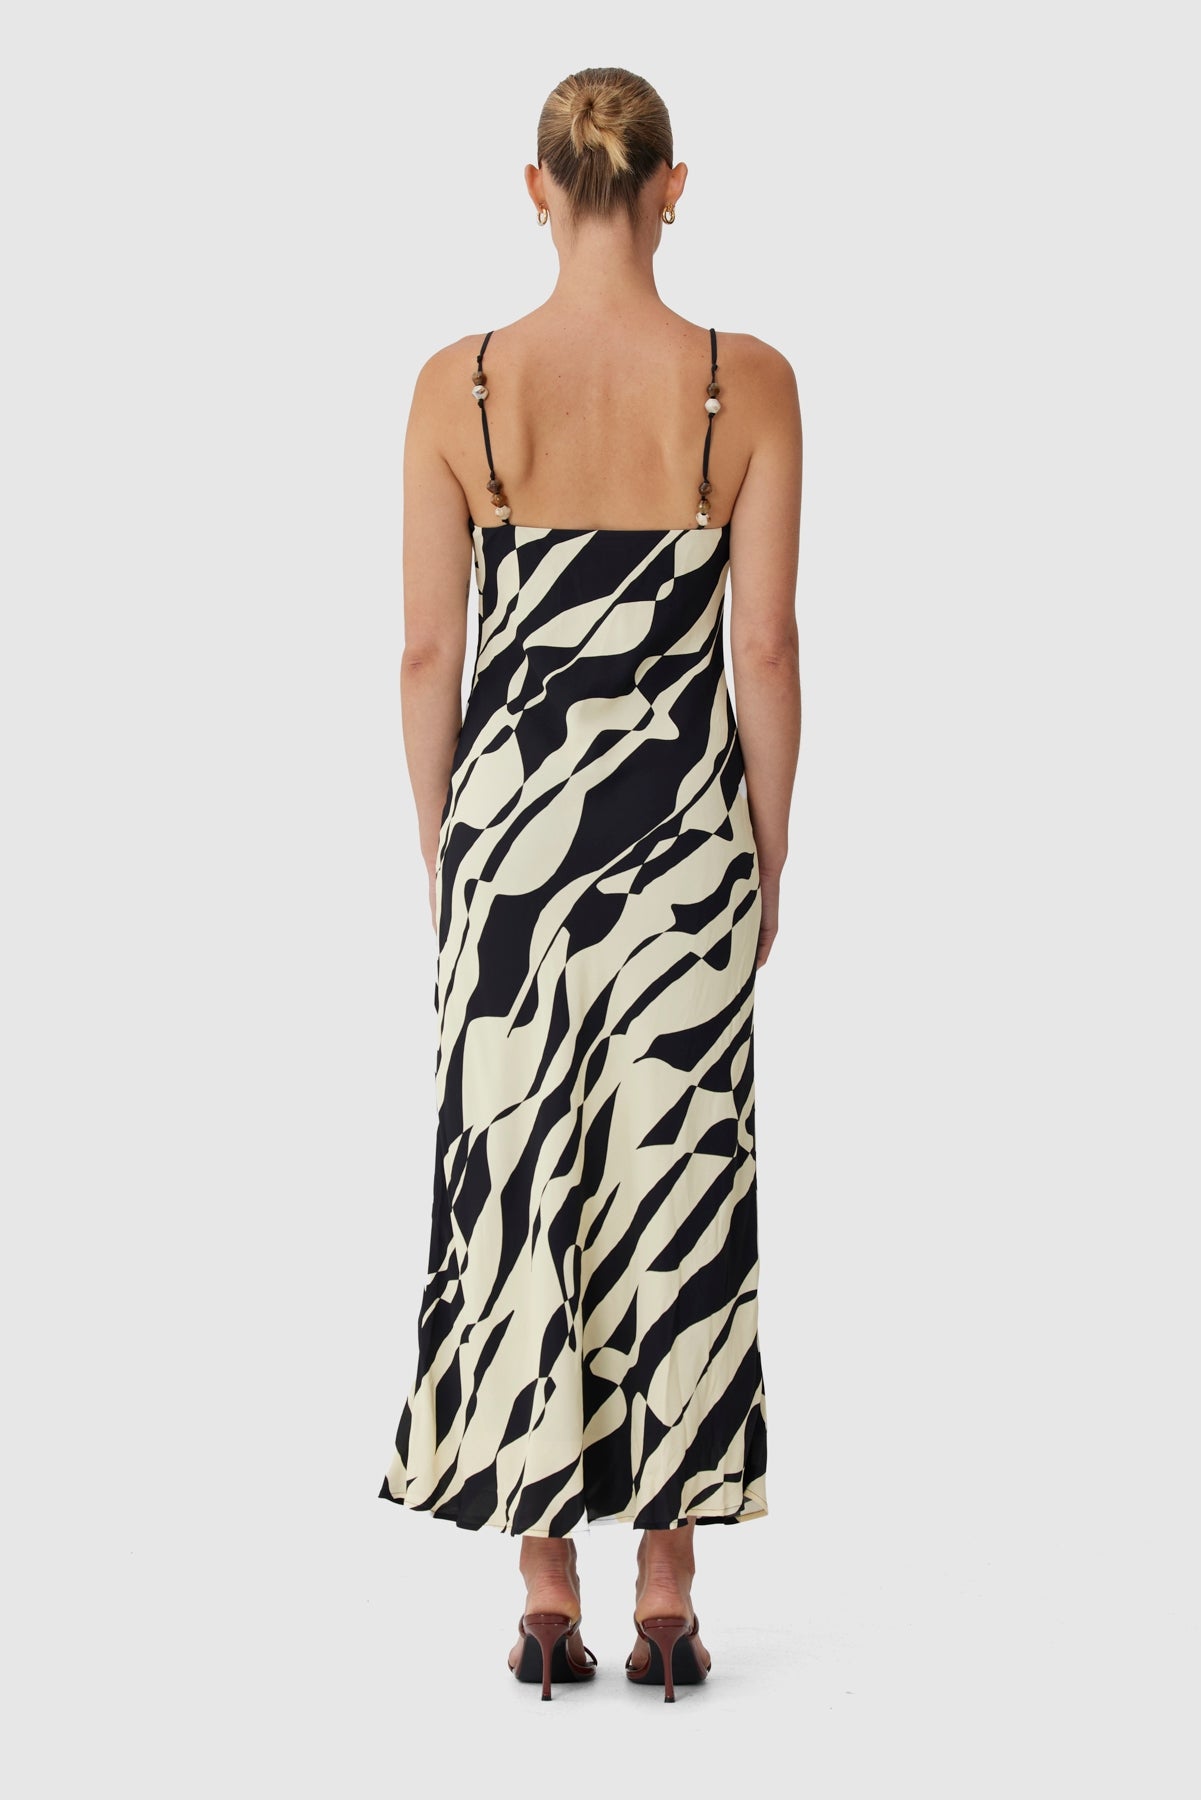 C/MEO Collective - Nothing Less Dress - Shapes Print